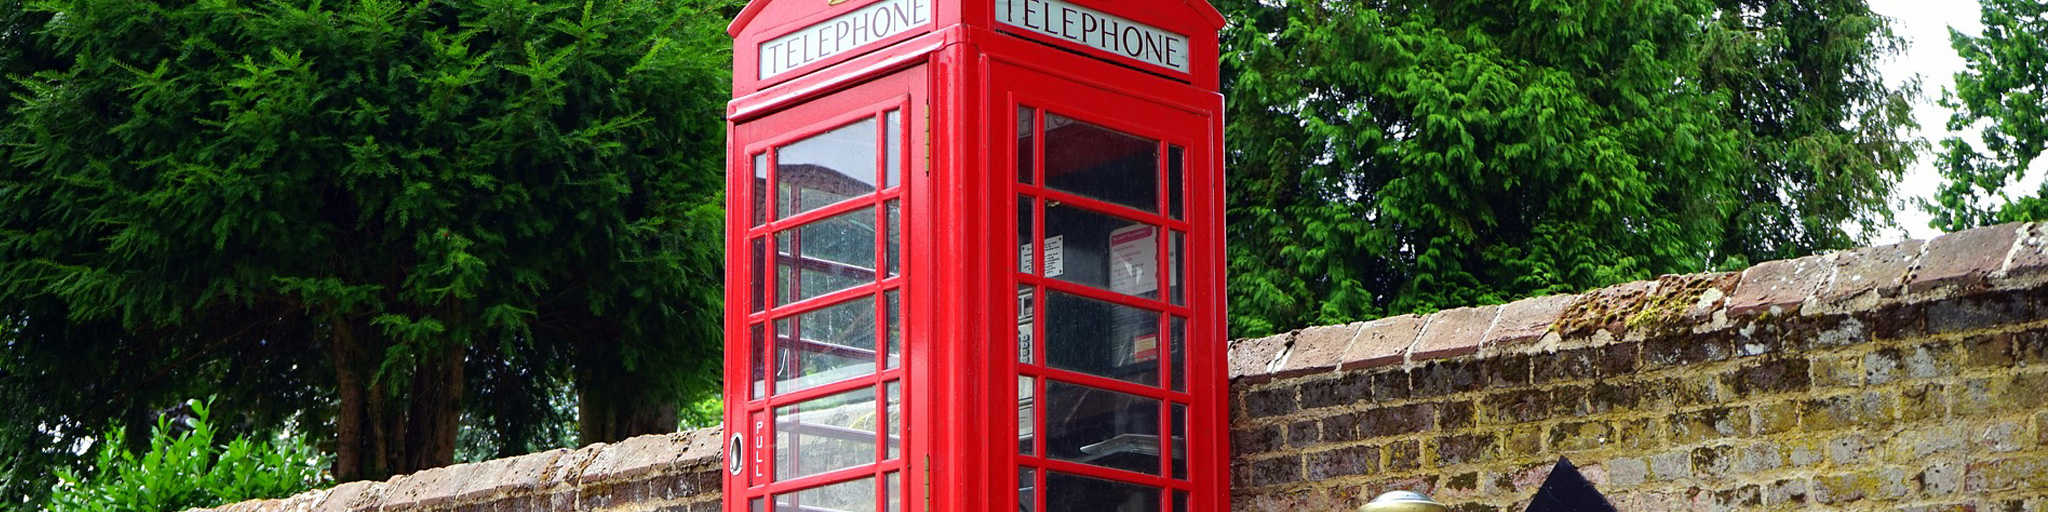 Red English Phone Booth